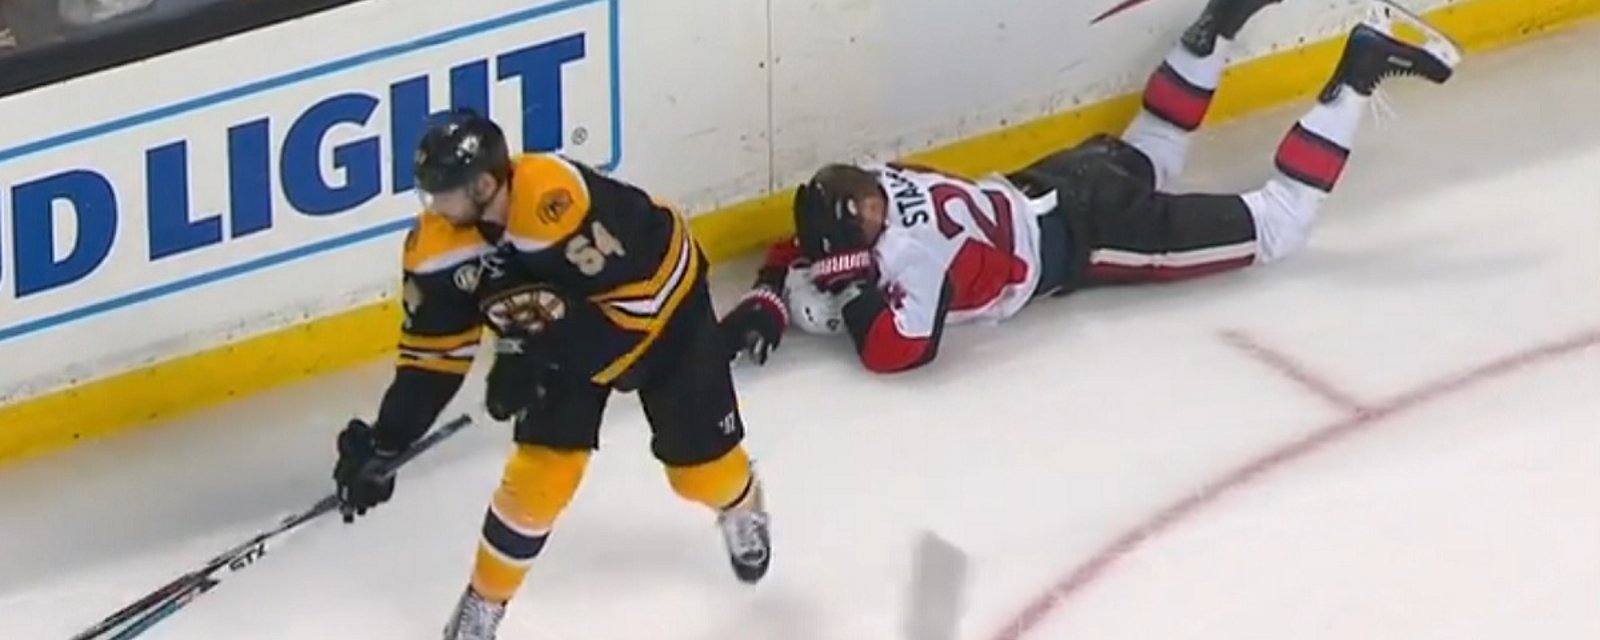 McQuaid lays out player with a brutal hit from behind.